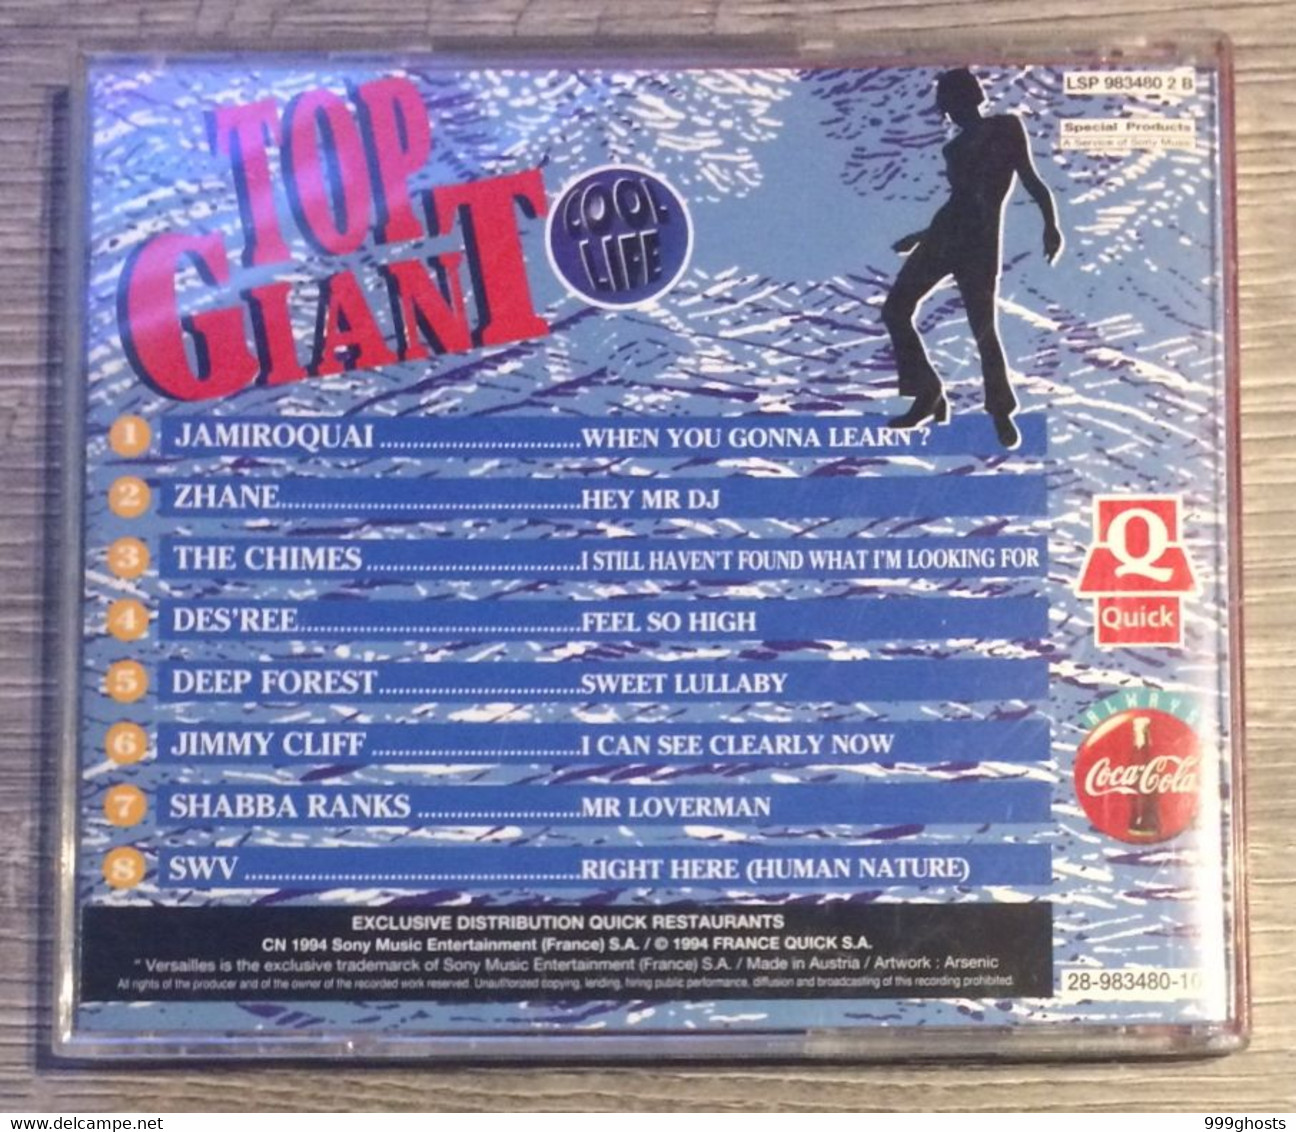 QUICK CD TOP GAINT (Case Damaged, CD Good) JAMIROQUAI SHABBA RANKS ZHANE JIMMY CLIFF DES'REE DEEP FOREST THE CHIMES SWV - Compilaciones